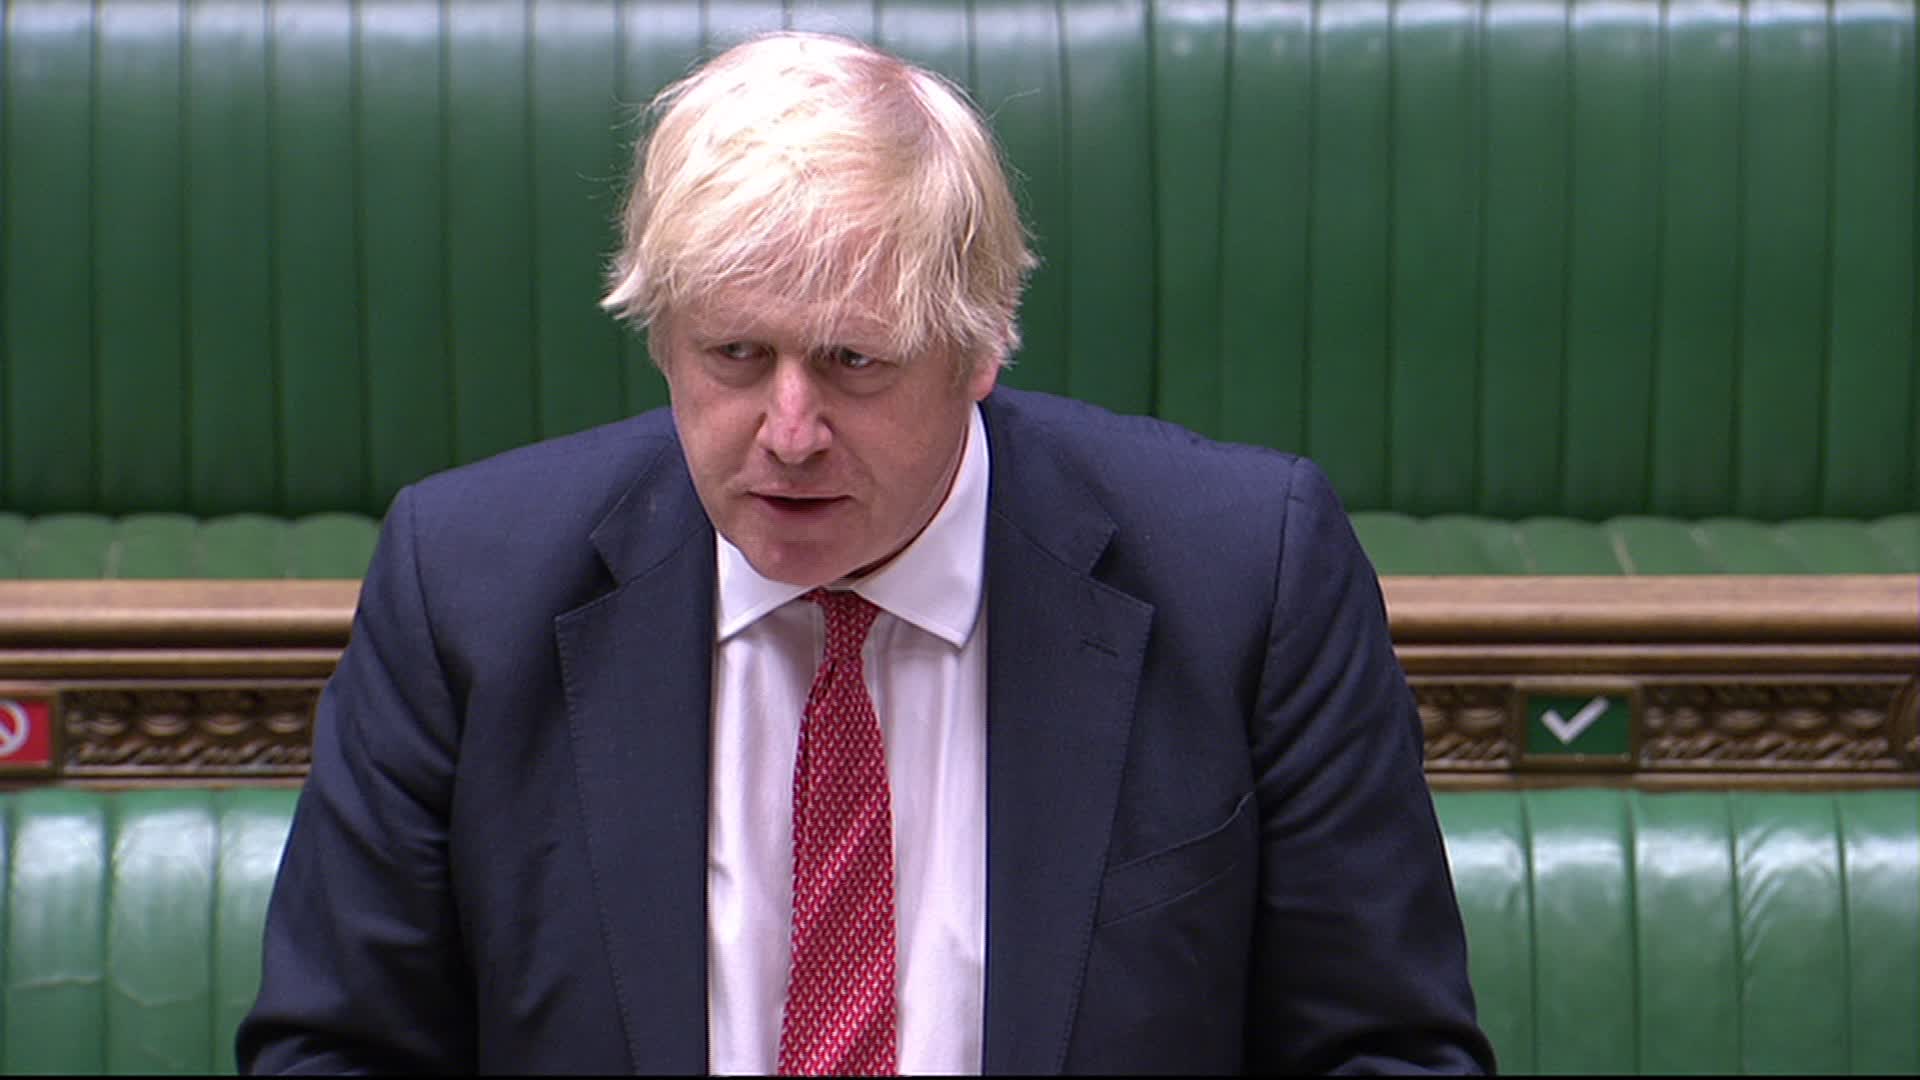 Prime Minister Boris Johnson gives a statement to the House of Commons on COVID-19 on May 11 in London.